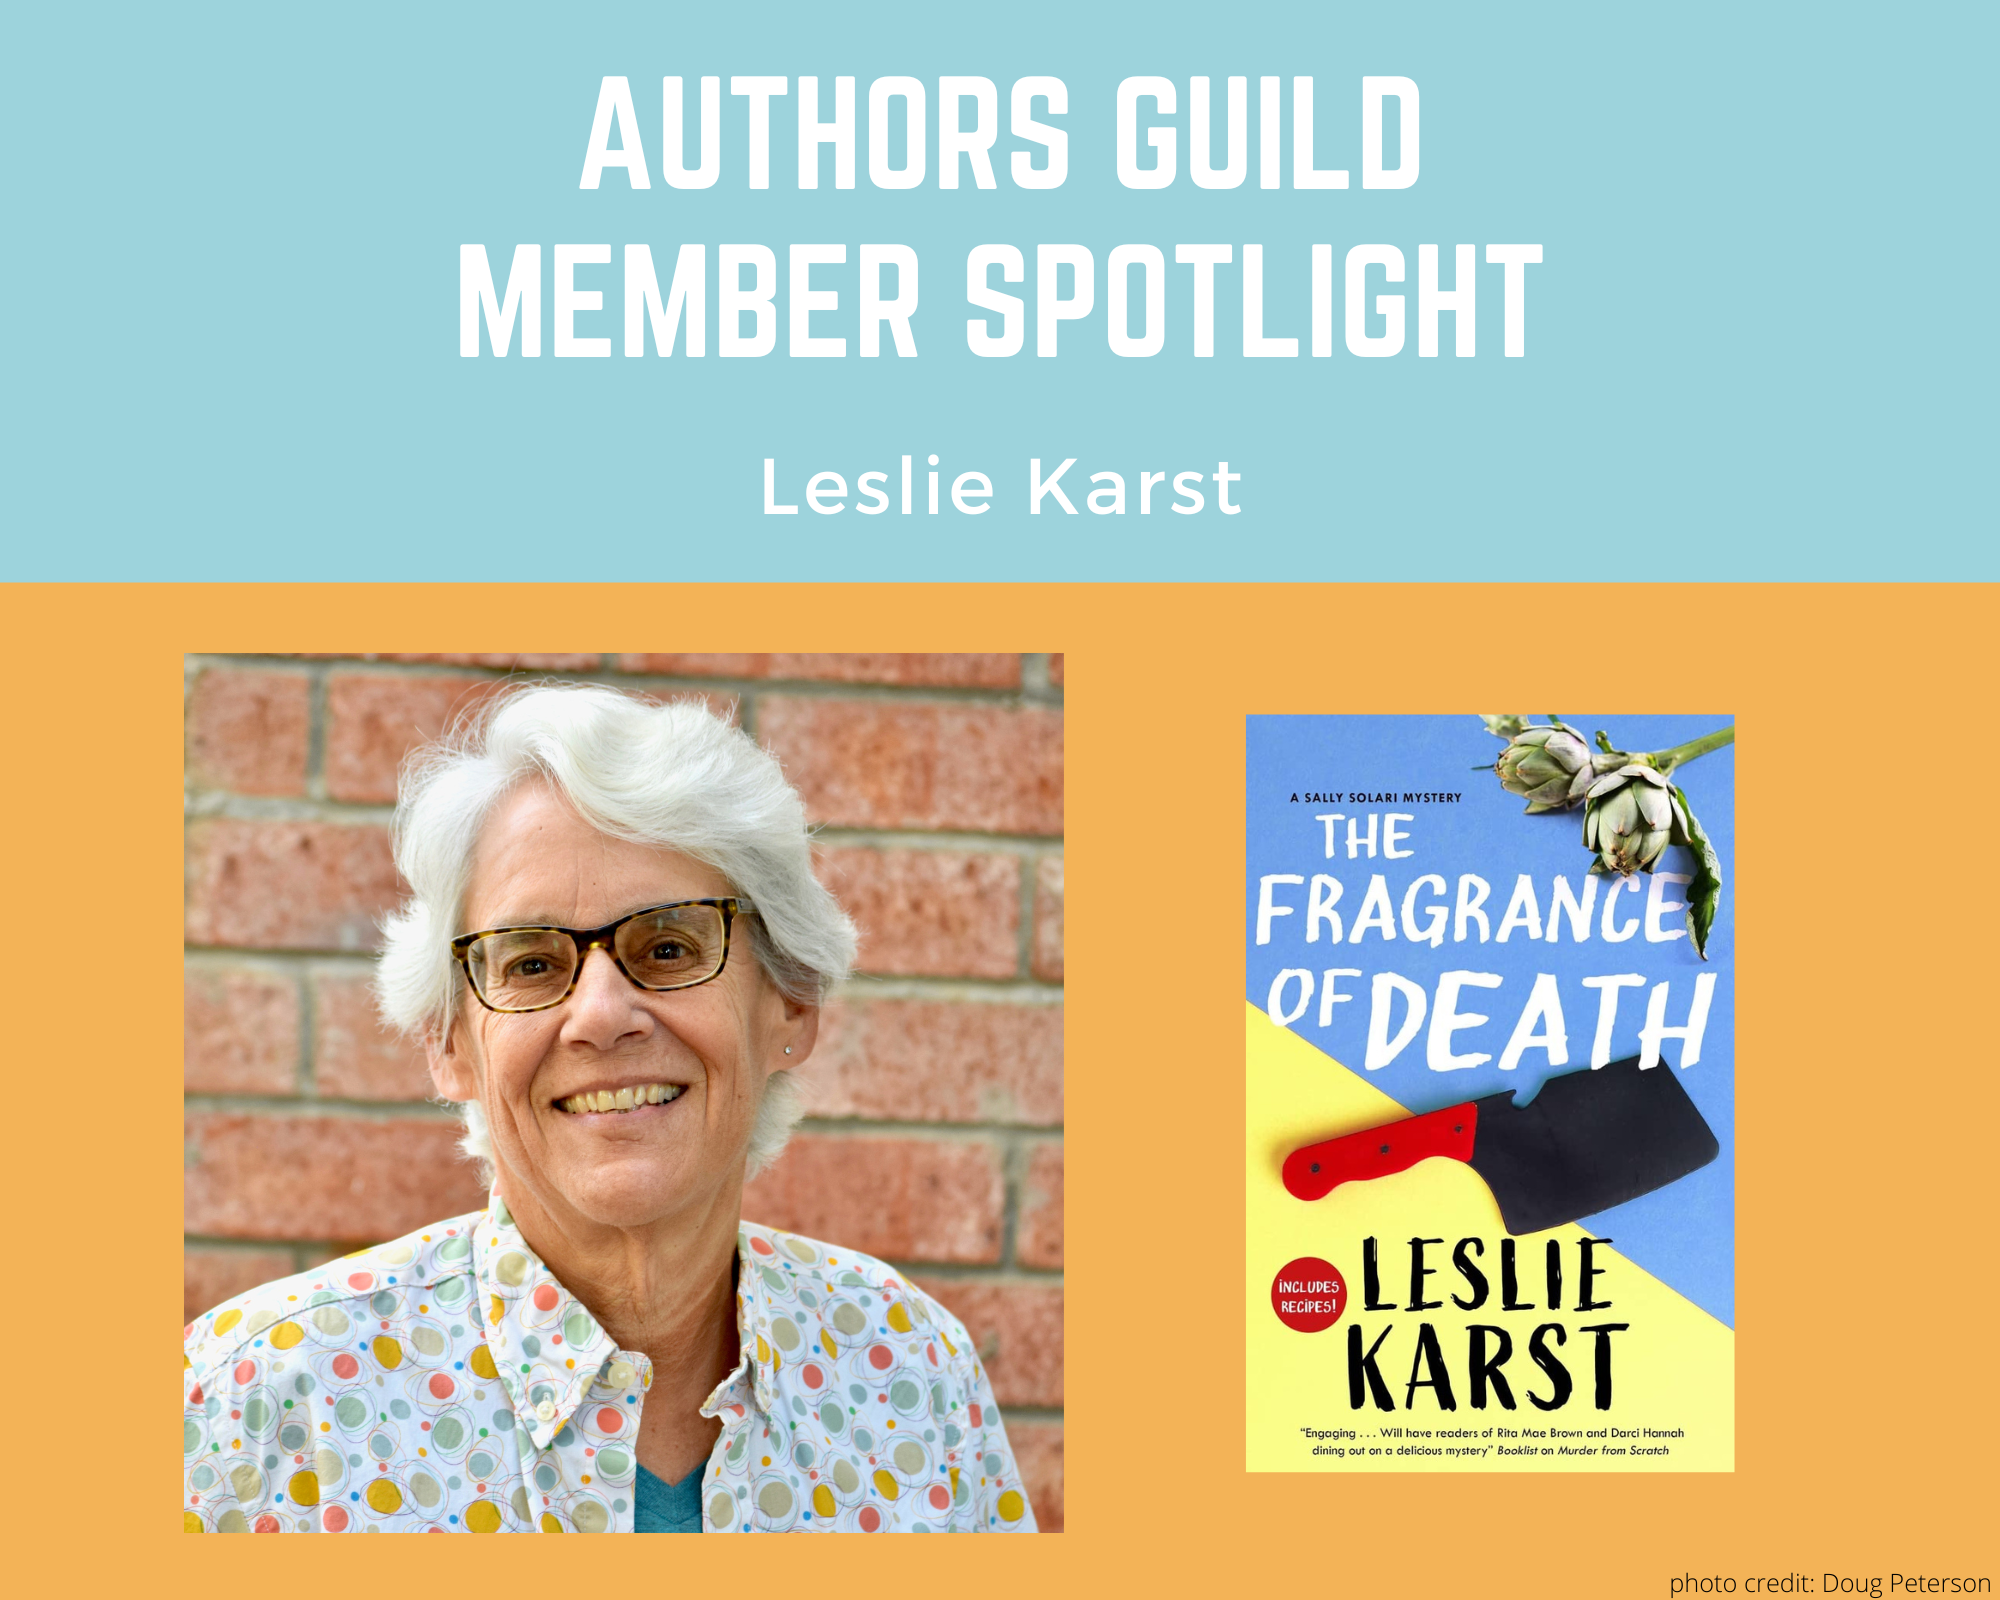 author Leslie Karst smiling directly at the camera and an image of her book The Fragrance of Death